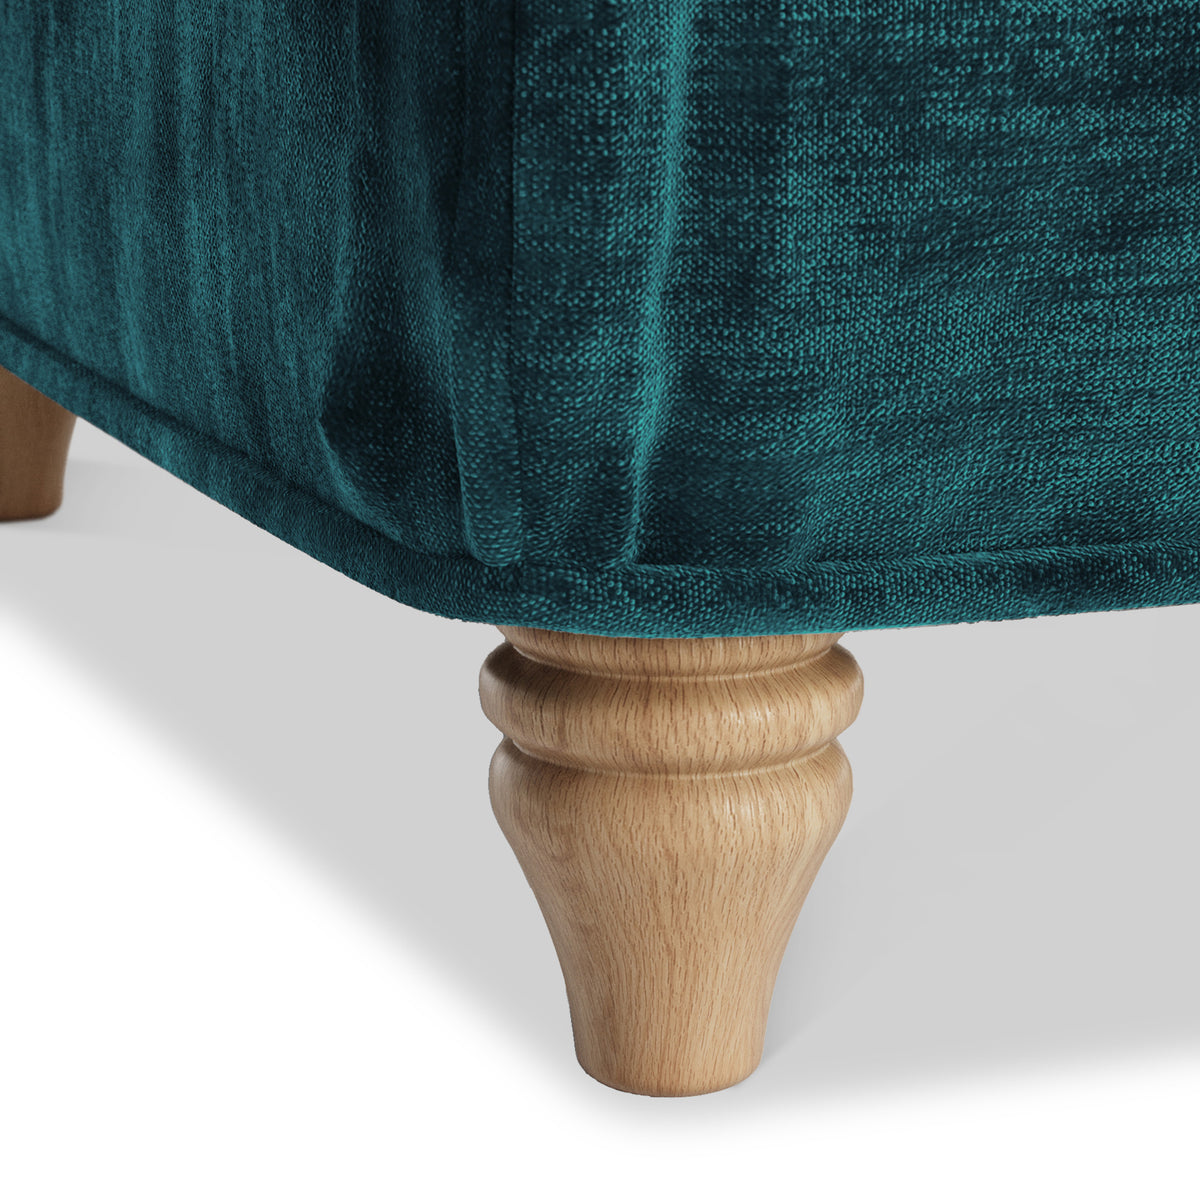 Alfie and Arthur Emerald Green Universal Footstool from Roseland Furniture